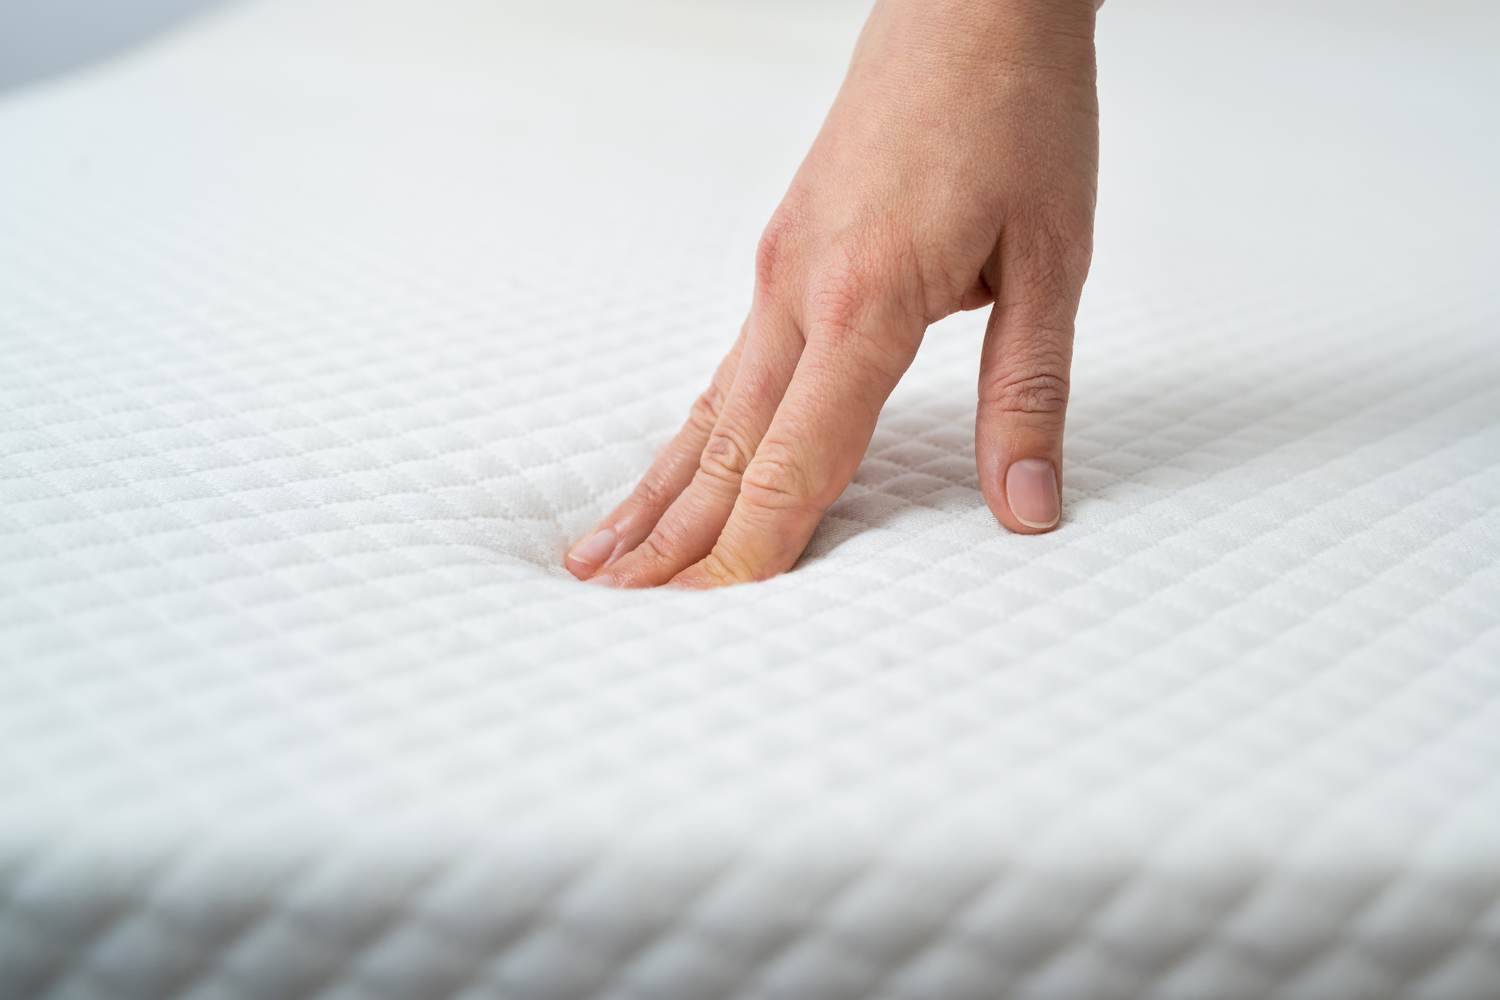 Close-up of a hand pressing into a mattress surface to test its firmness, emphasizing the mattress's supportive qualities.